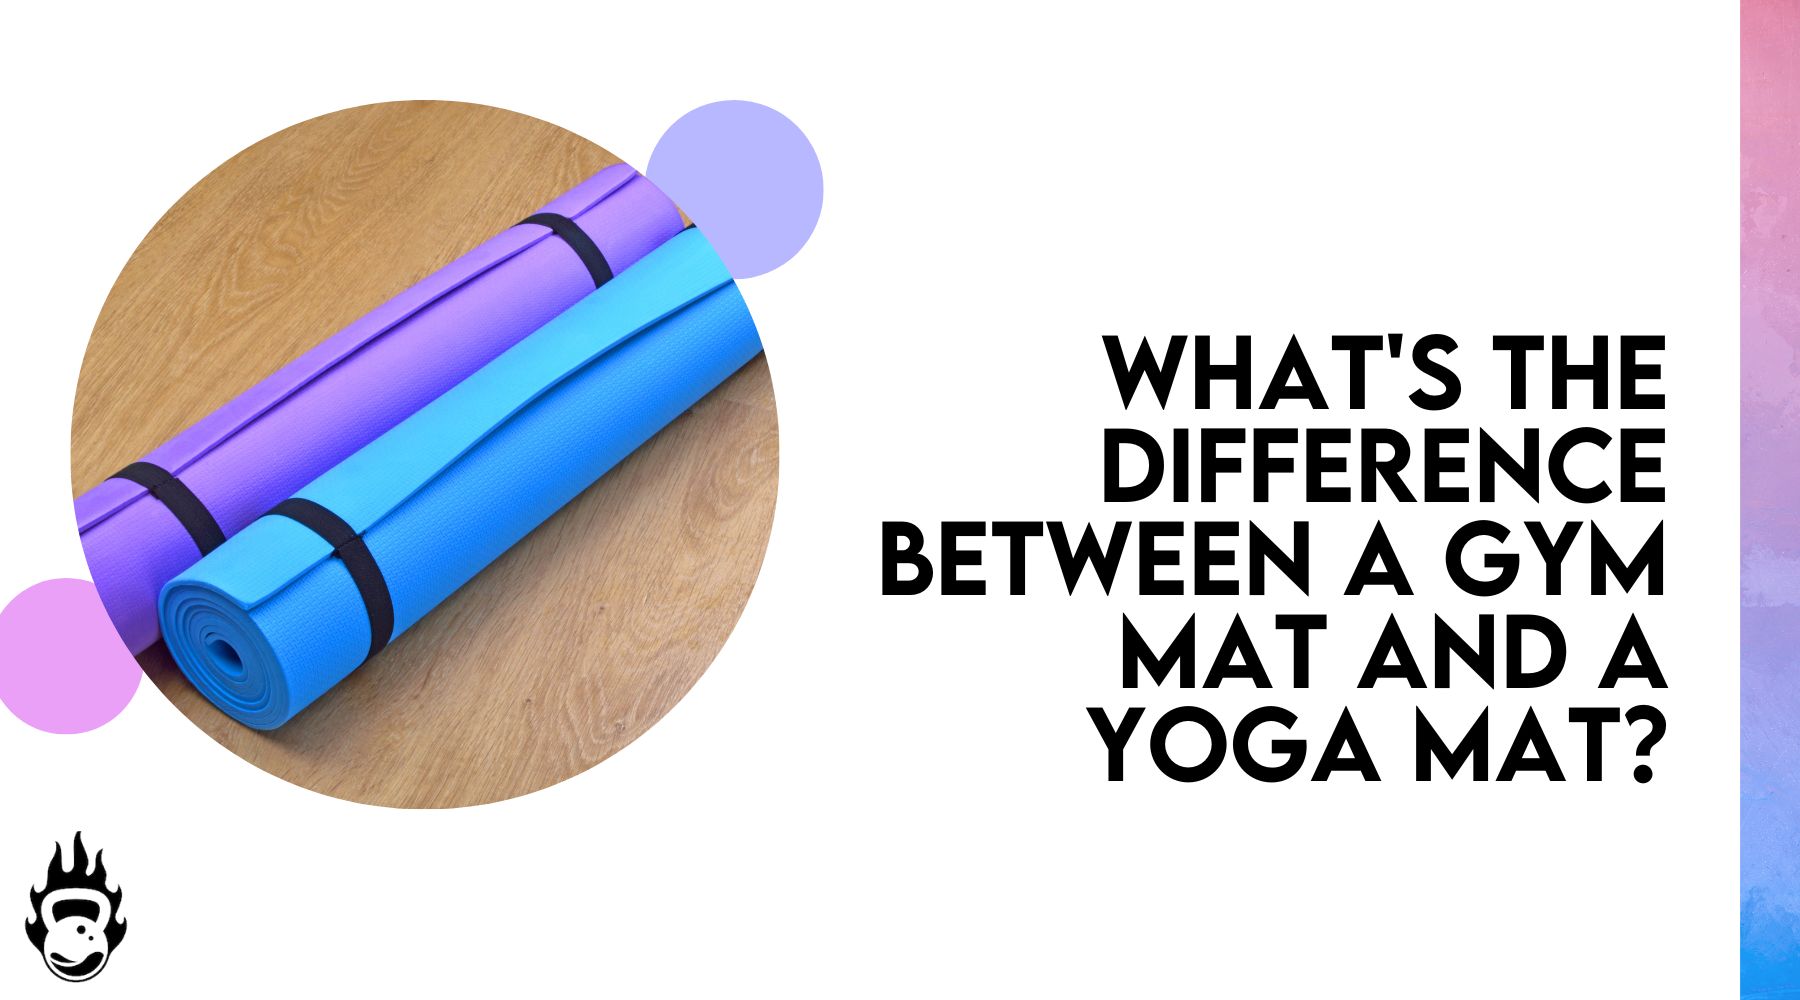 What's the difference between a Gym mat and a Yoga mat